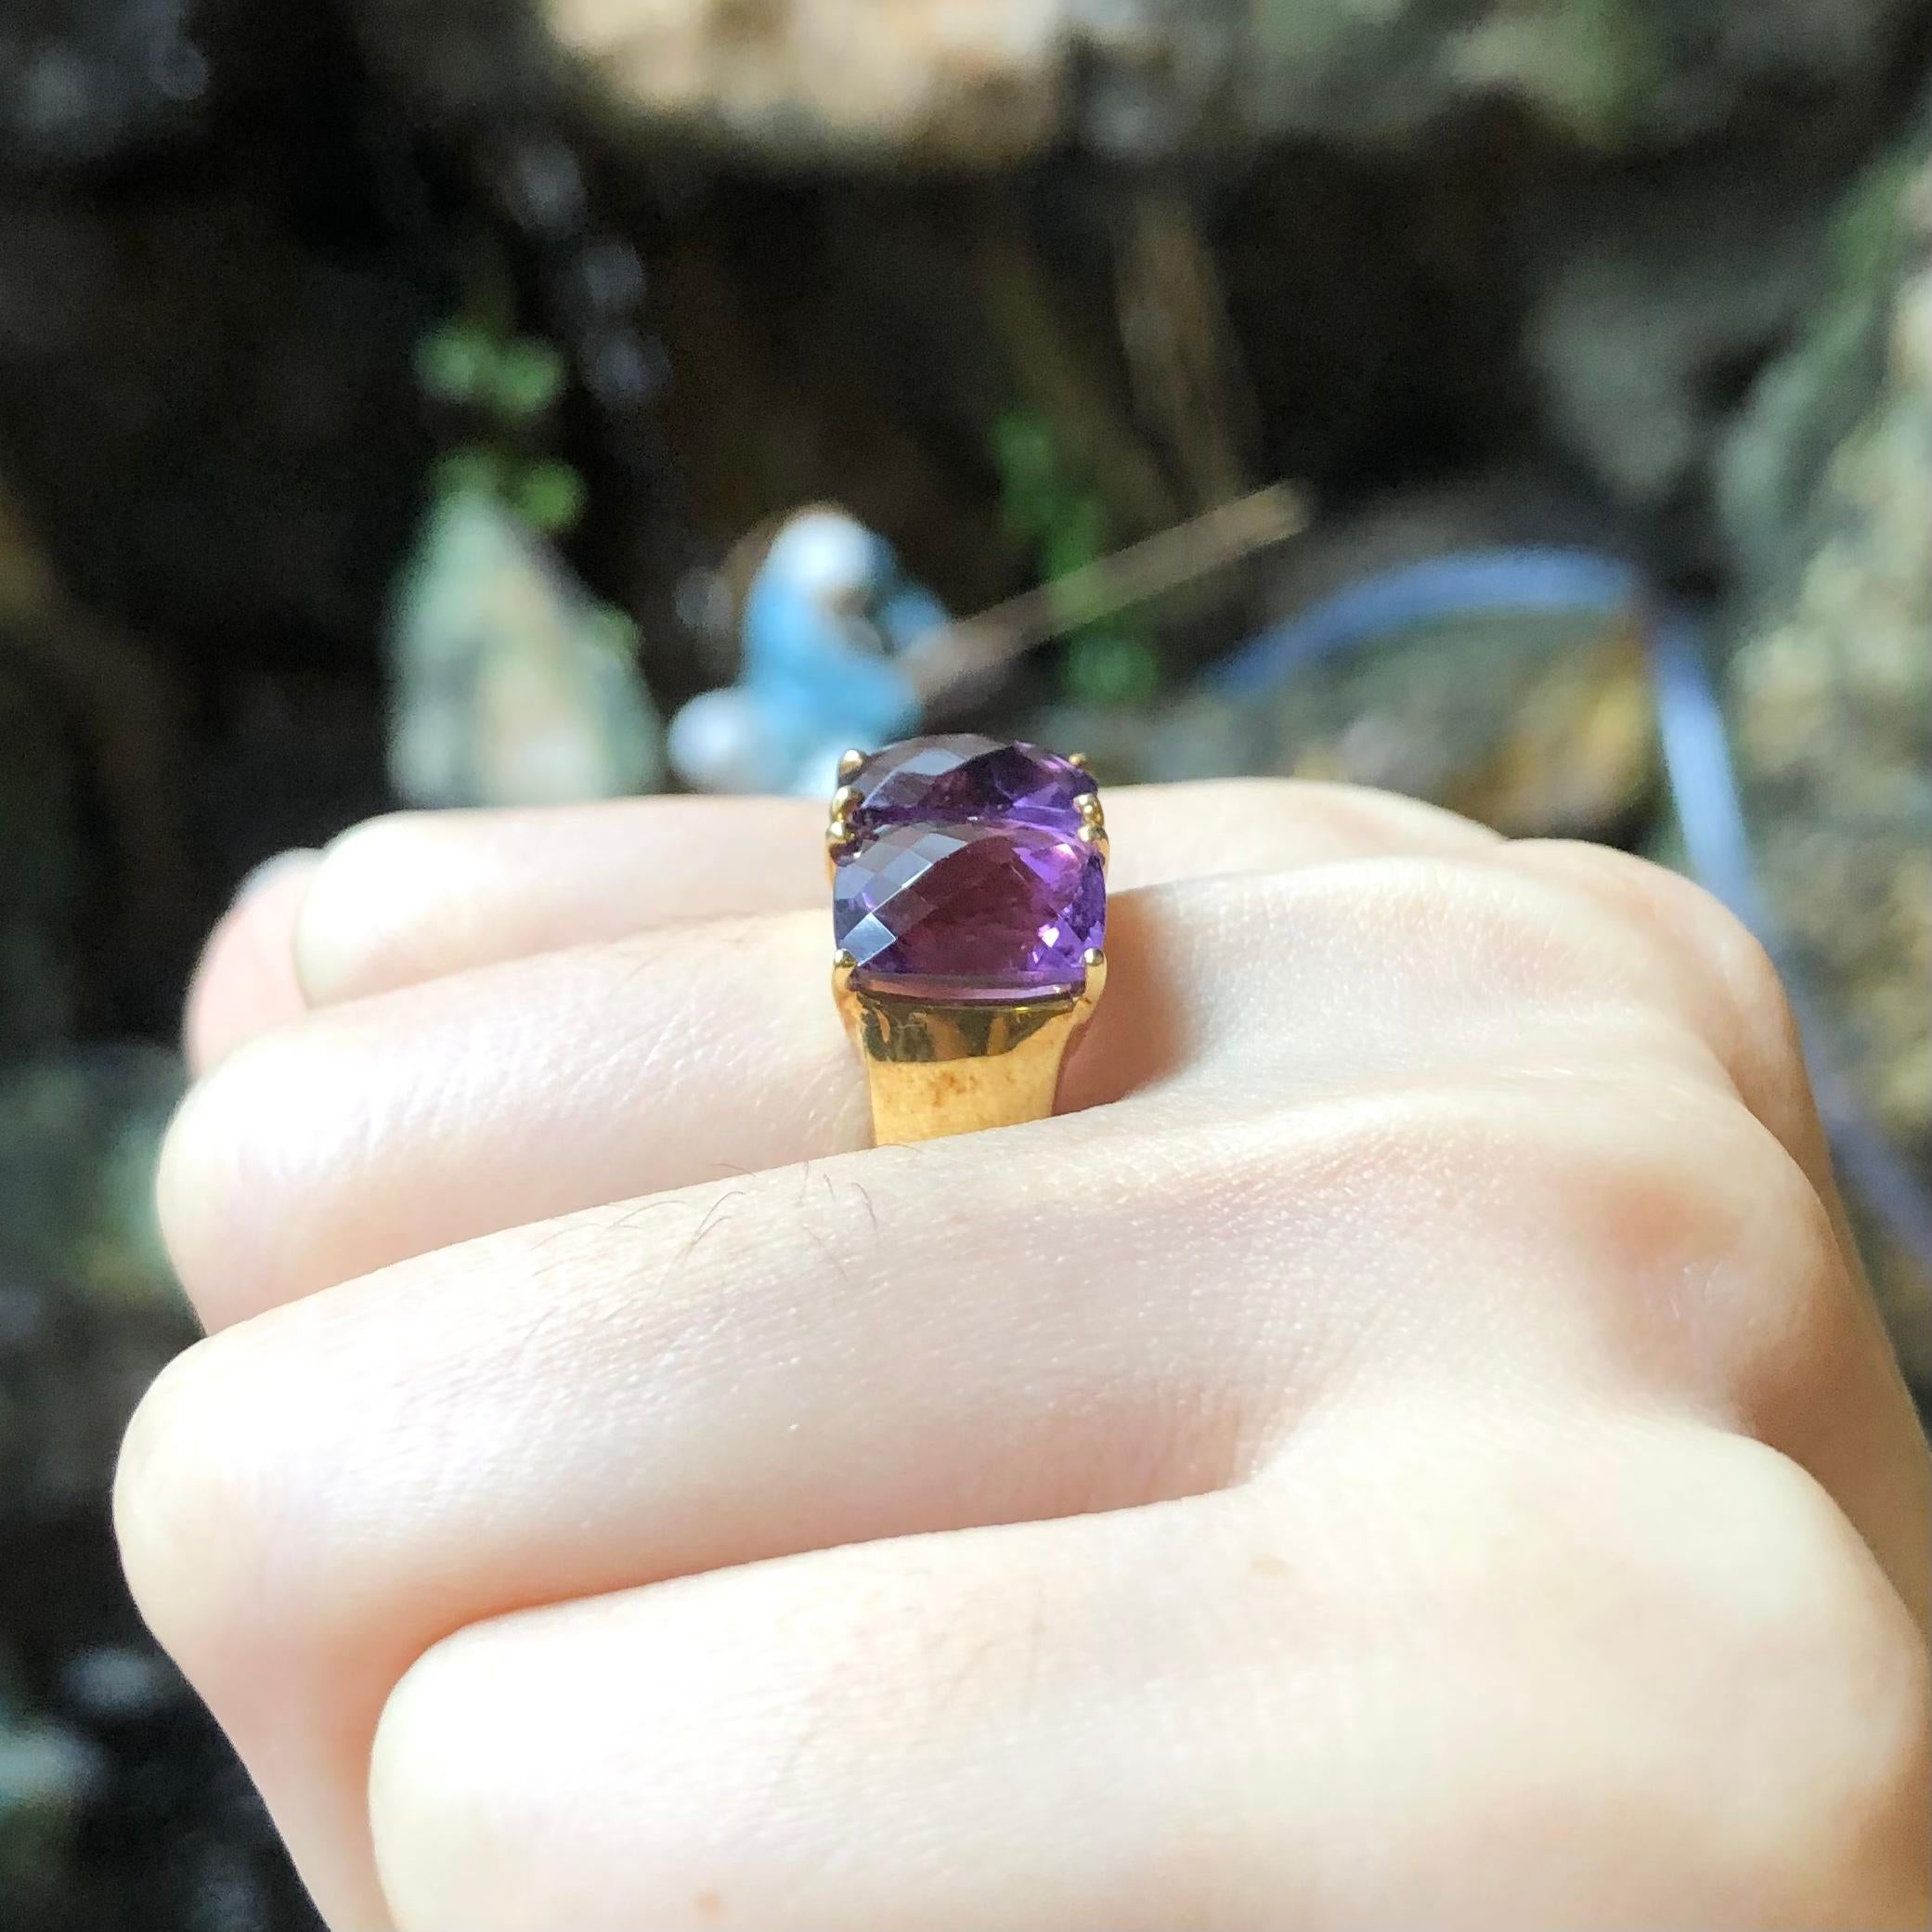 Amethyst 6.30  carats Ring set in 18 Karat Gold Settings

Width:  1.9 cm 
Length: 0.9 cm
Ring Size: 53
Total Weight: 9.7 grams



